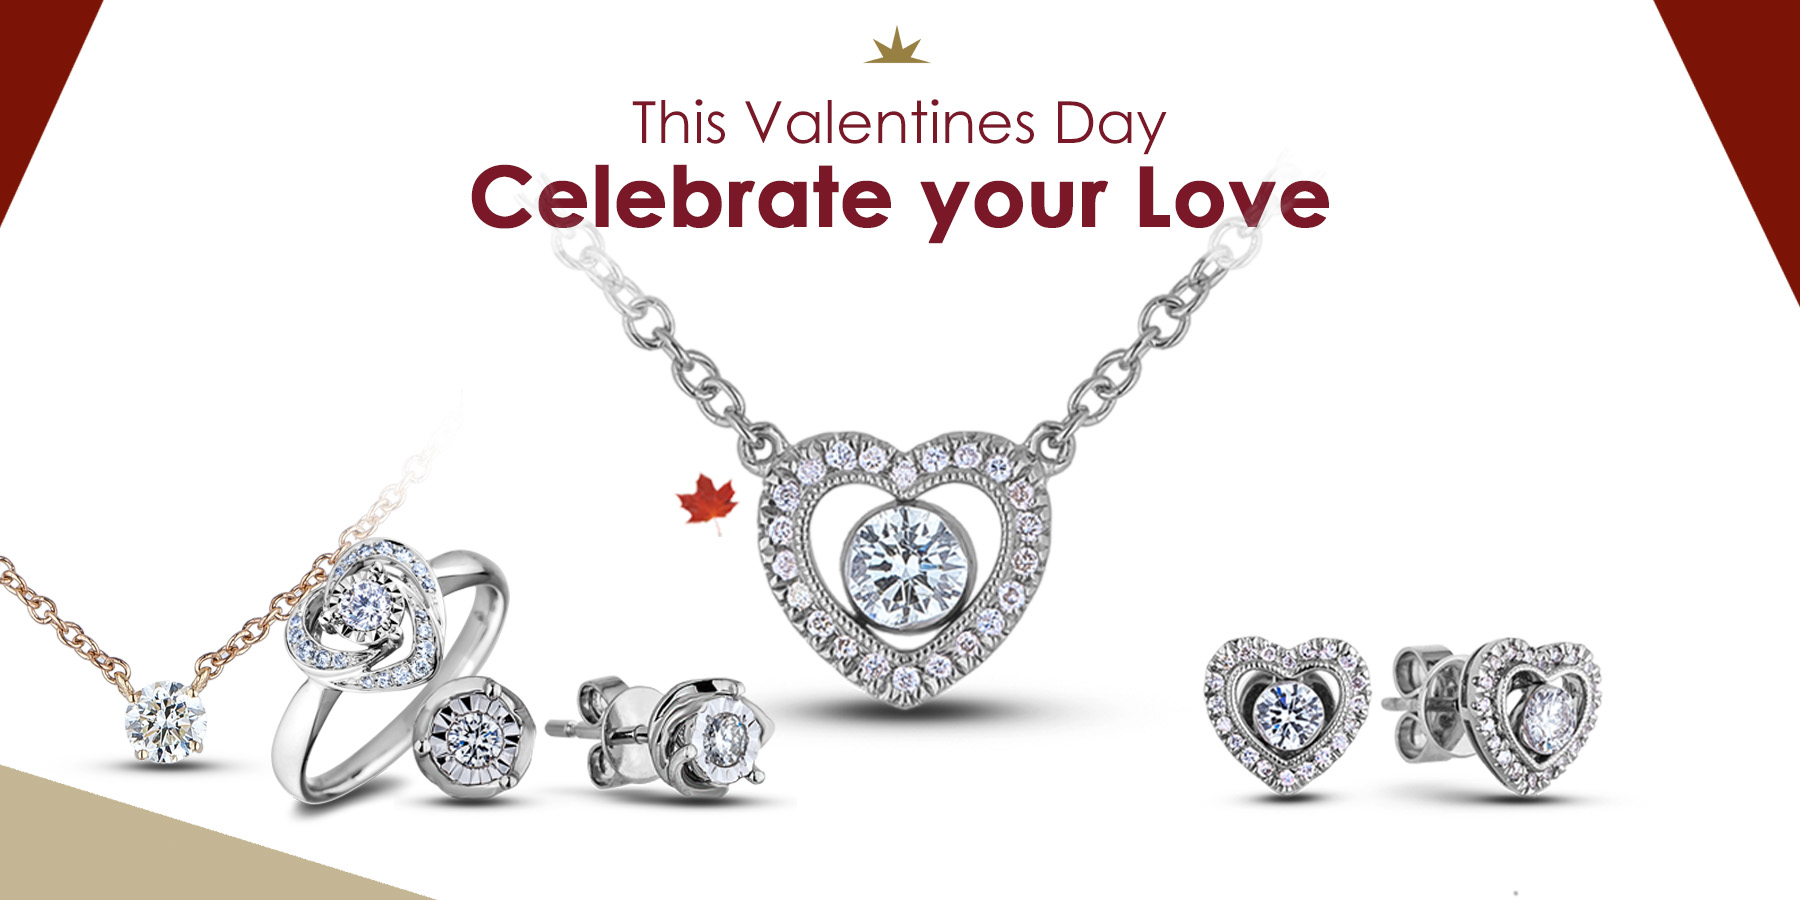 Diamond Jewelry Gift Ideas for Her on Valentine's Day